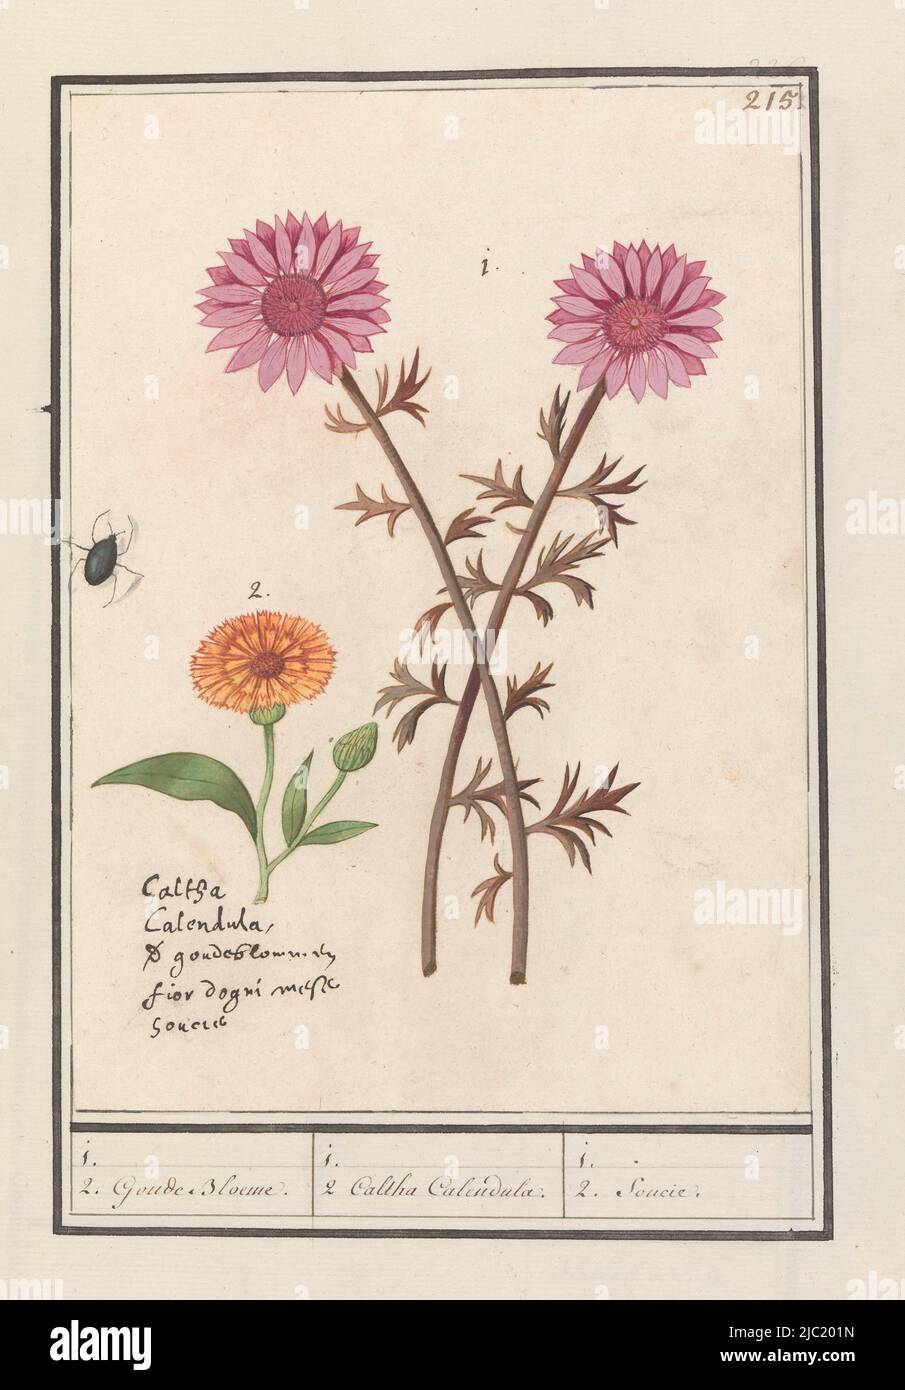 Two pink flowers of an unknown species, possibly an anemone, and a marigold. Also a beetle. Numbered upper right: 215. Bottom left the name in five languages. Part of the third album with drawings of flowers and plants. Tenth of twelve albums with drawings of animals, birds and plants known around 1600, commissioned by emperor Rudolf II. With notes in Dutch, Latin and French., Pink flower (unknown) and marigold (Calendula officinalis) 1. 2. Golden Flower. / 1. 2. Caltha Calendula. / 1. 2. Soucie., draughtsman: Anselmus Boëtius de Boodt, draughtsman: Elias Verhulst, draughtsman: Praag Stock Photo